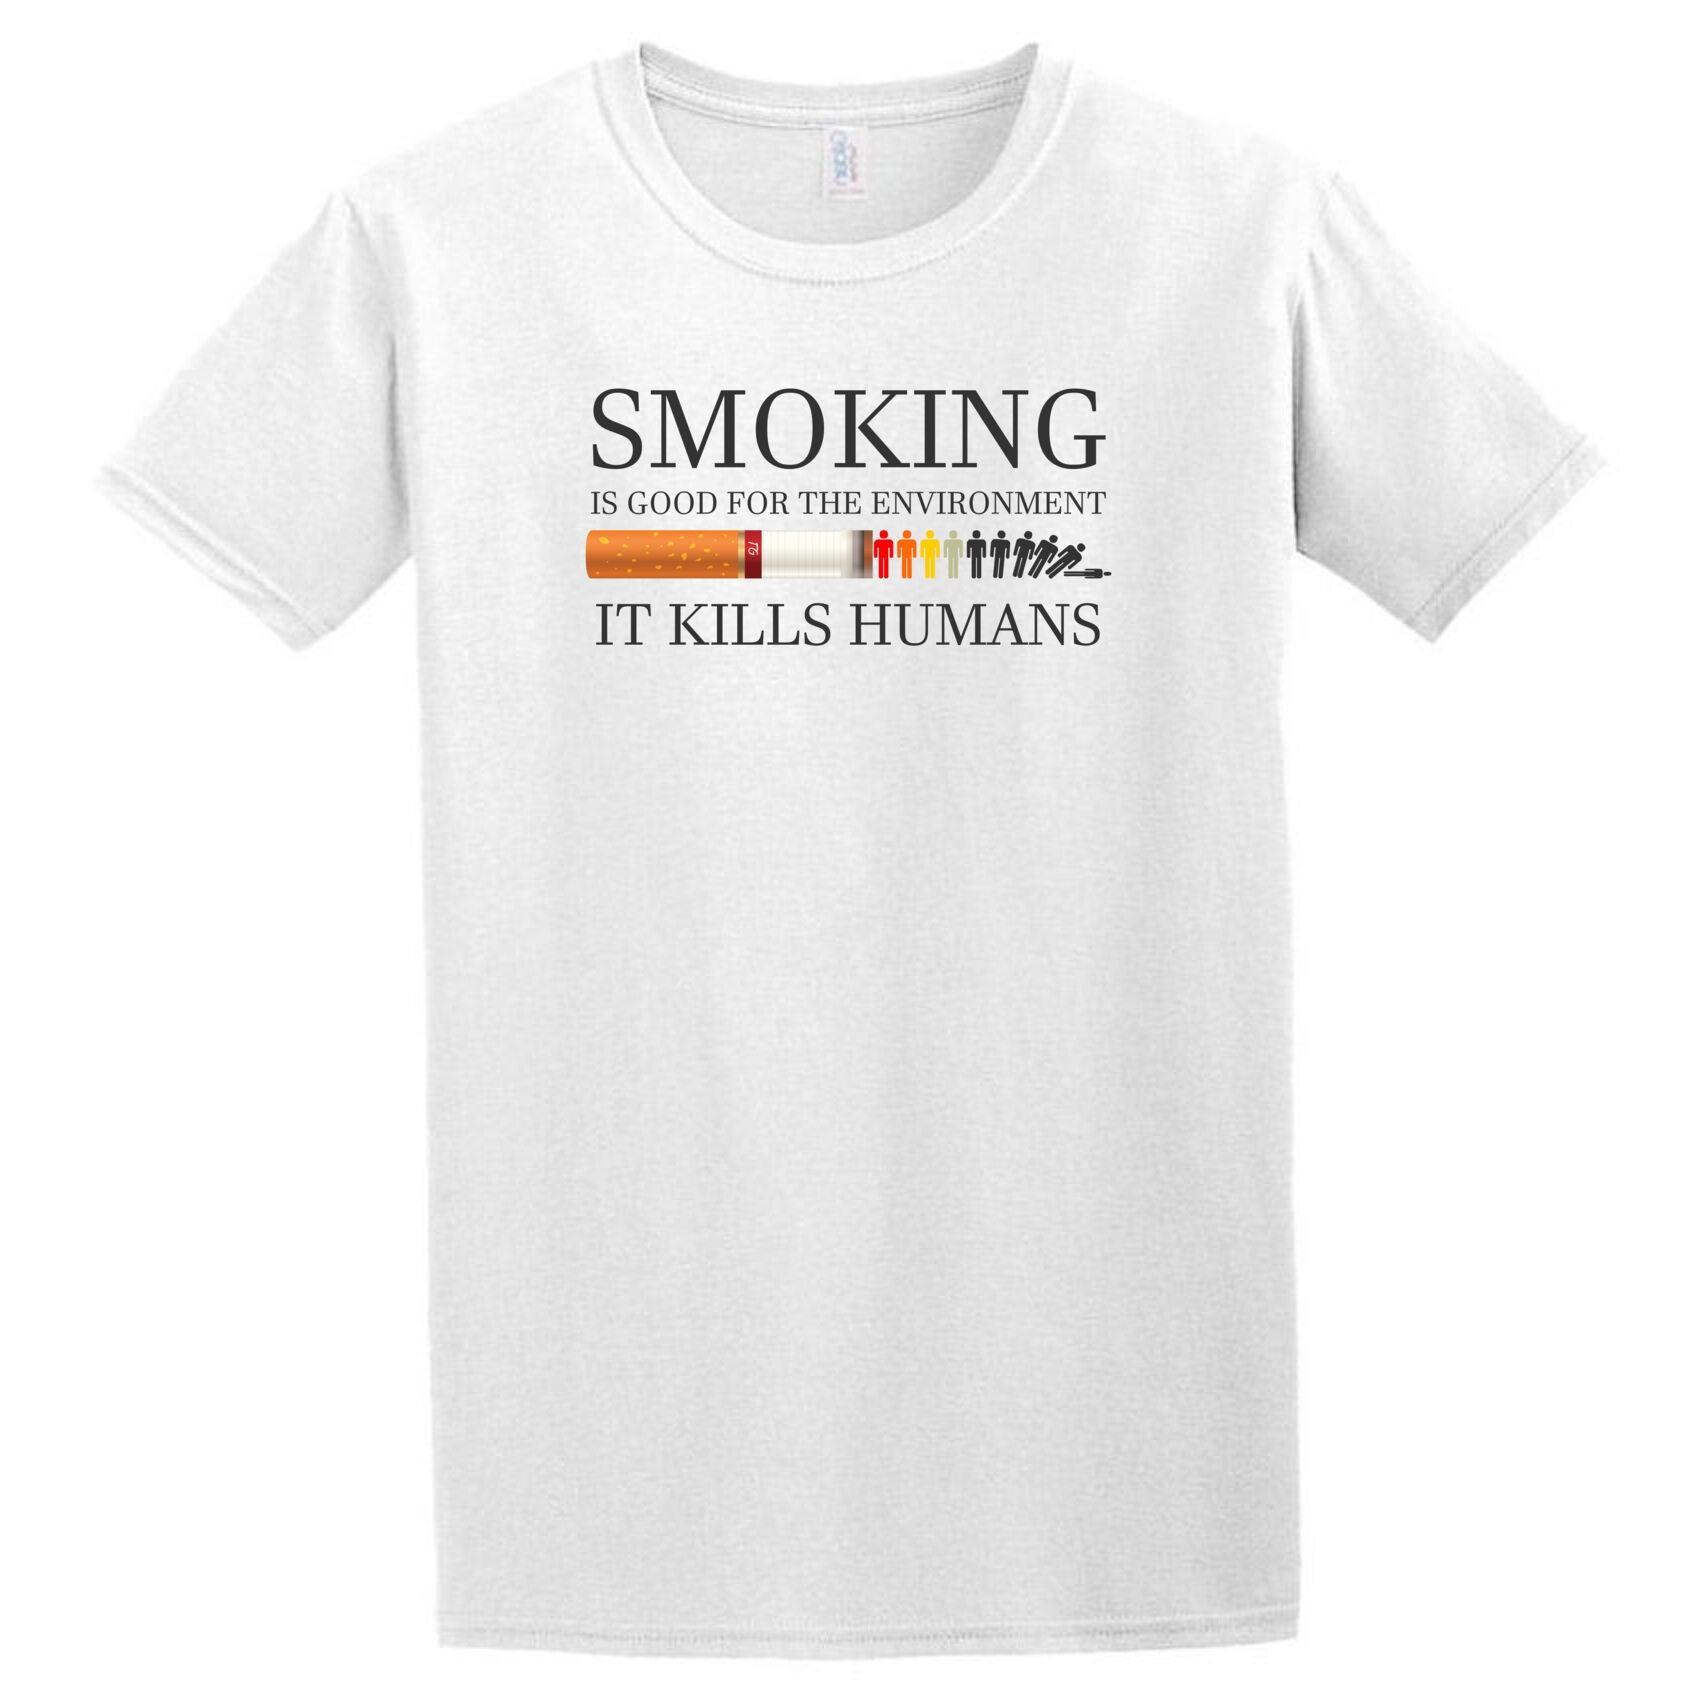 A white Smoking Kills T-shirt from Twisted Gifts.